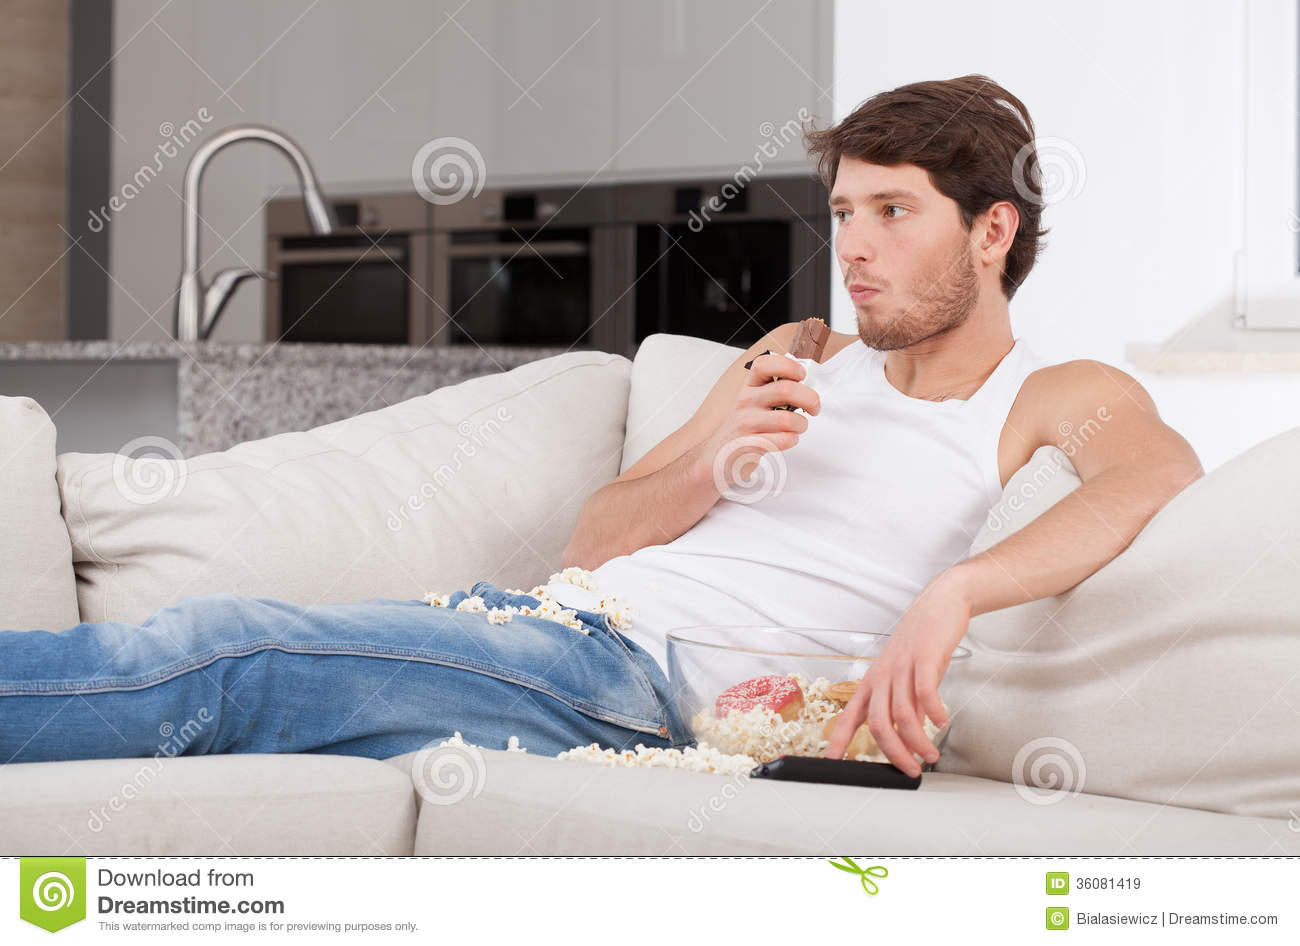 Bored Man Lying On Couch Royalty Free Stock Images   Image  36081419